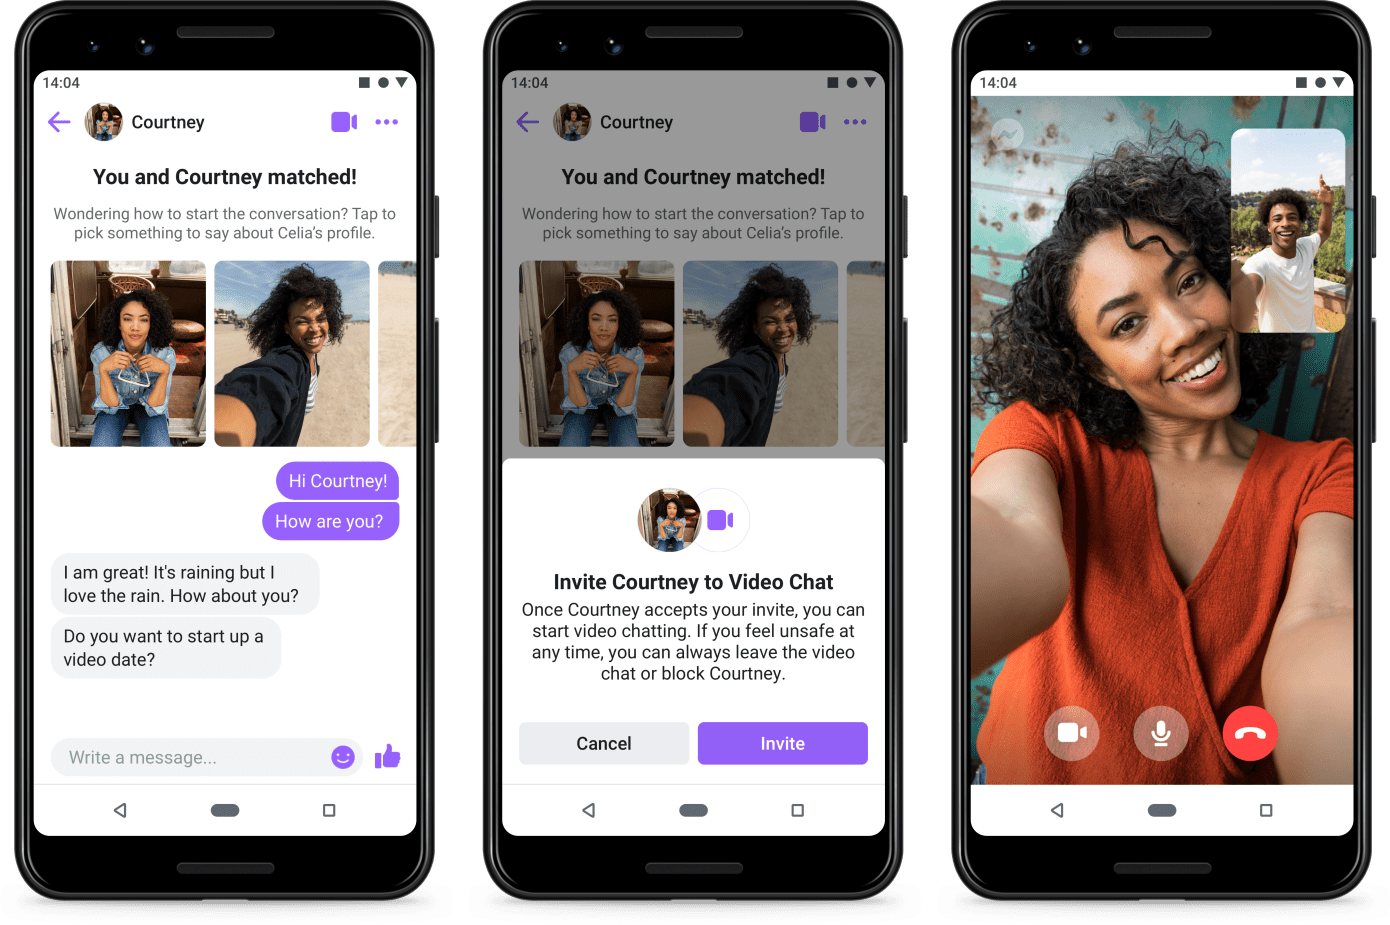 Facebook Dating launches in Europe after 9-month+ delay over privacy concerns